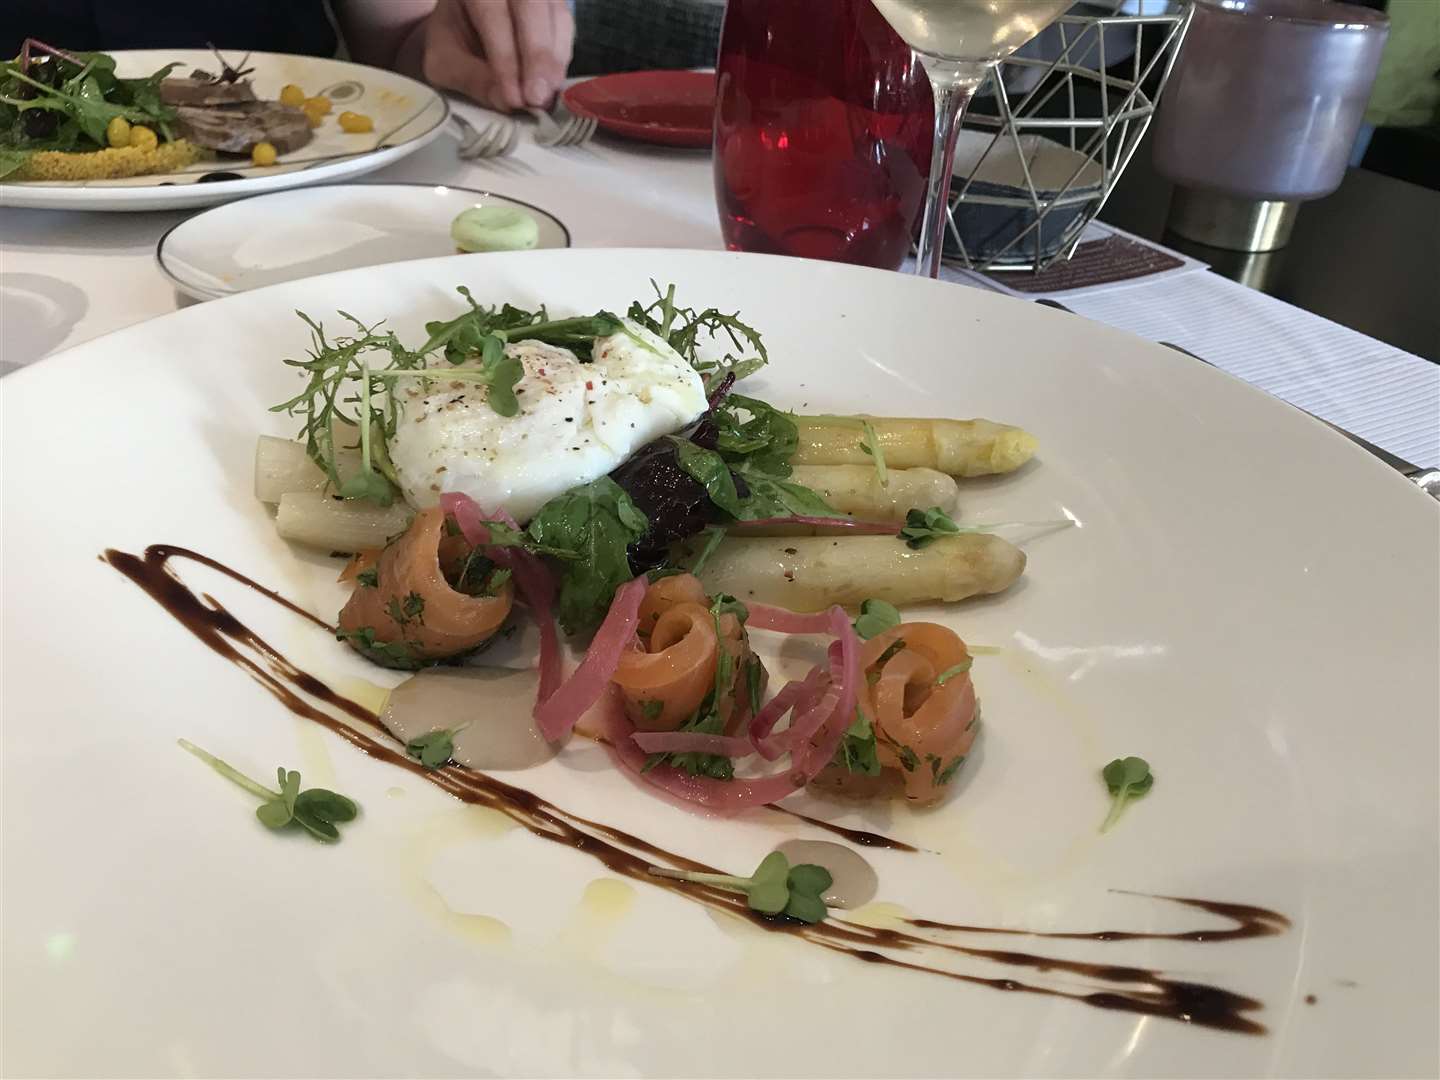 Delicious smoked salmon and asparagus starter served at Hotel La Matelote